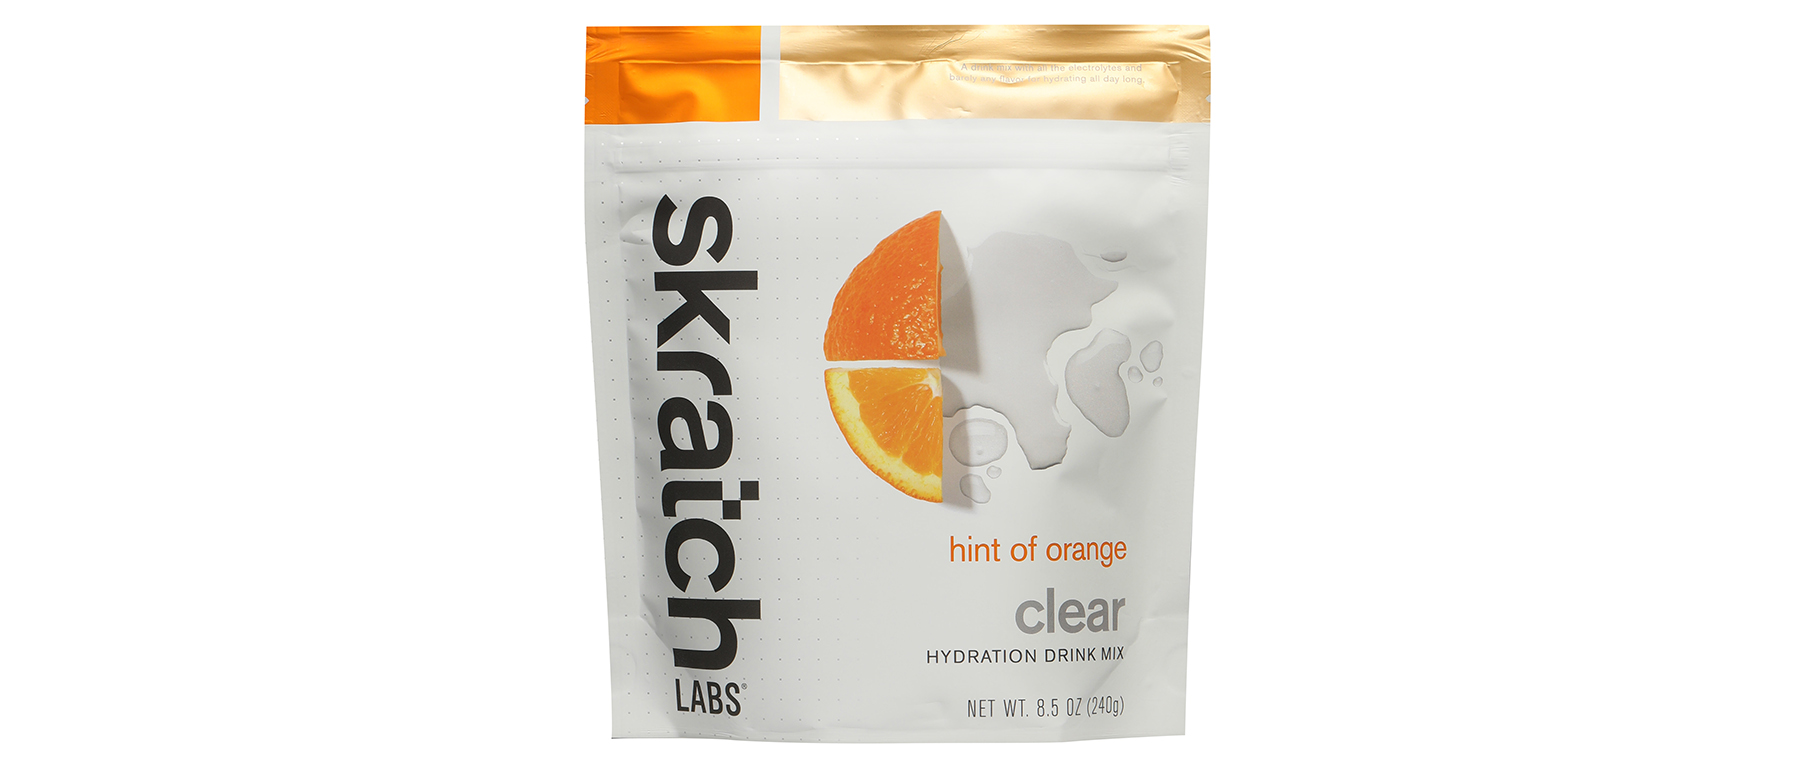 Skratch Labs Clear Hydration Drink Mix 16-Serving